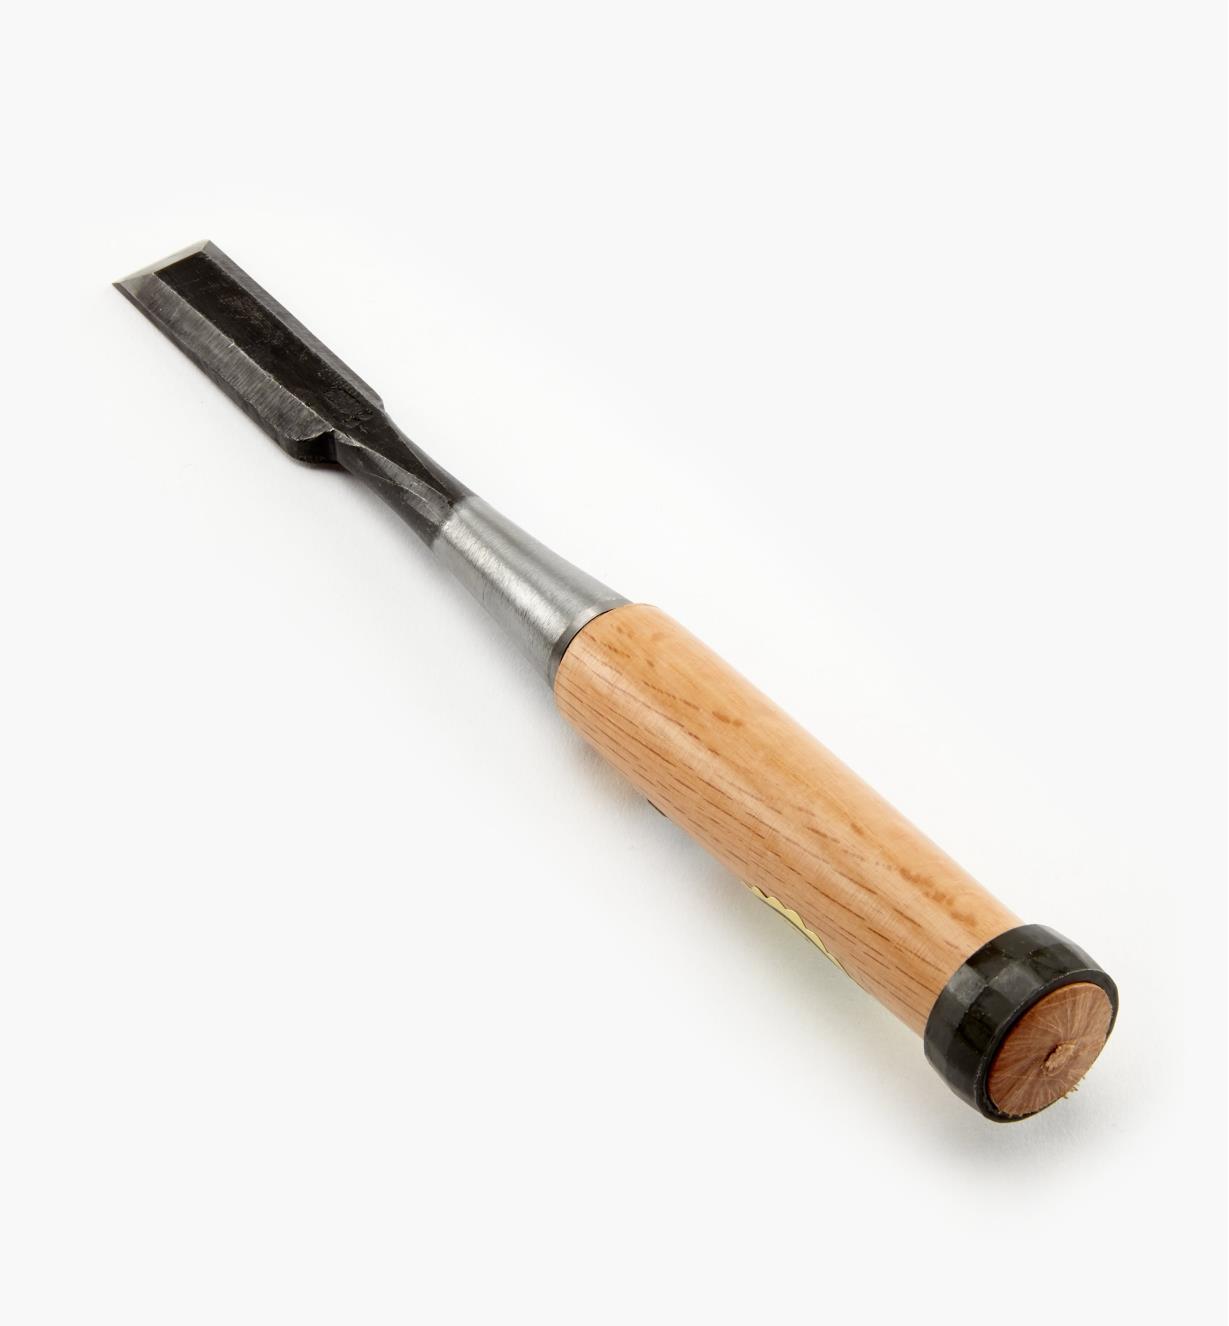 60S0618 - BE Chisel, 18mm (11/16")*